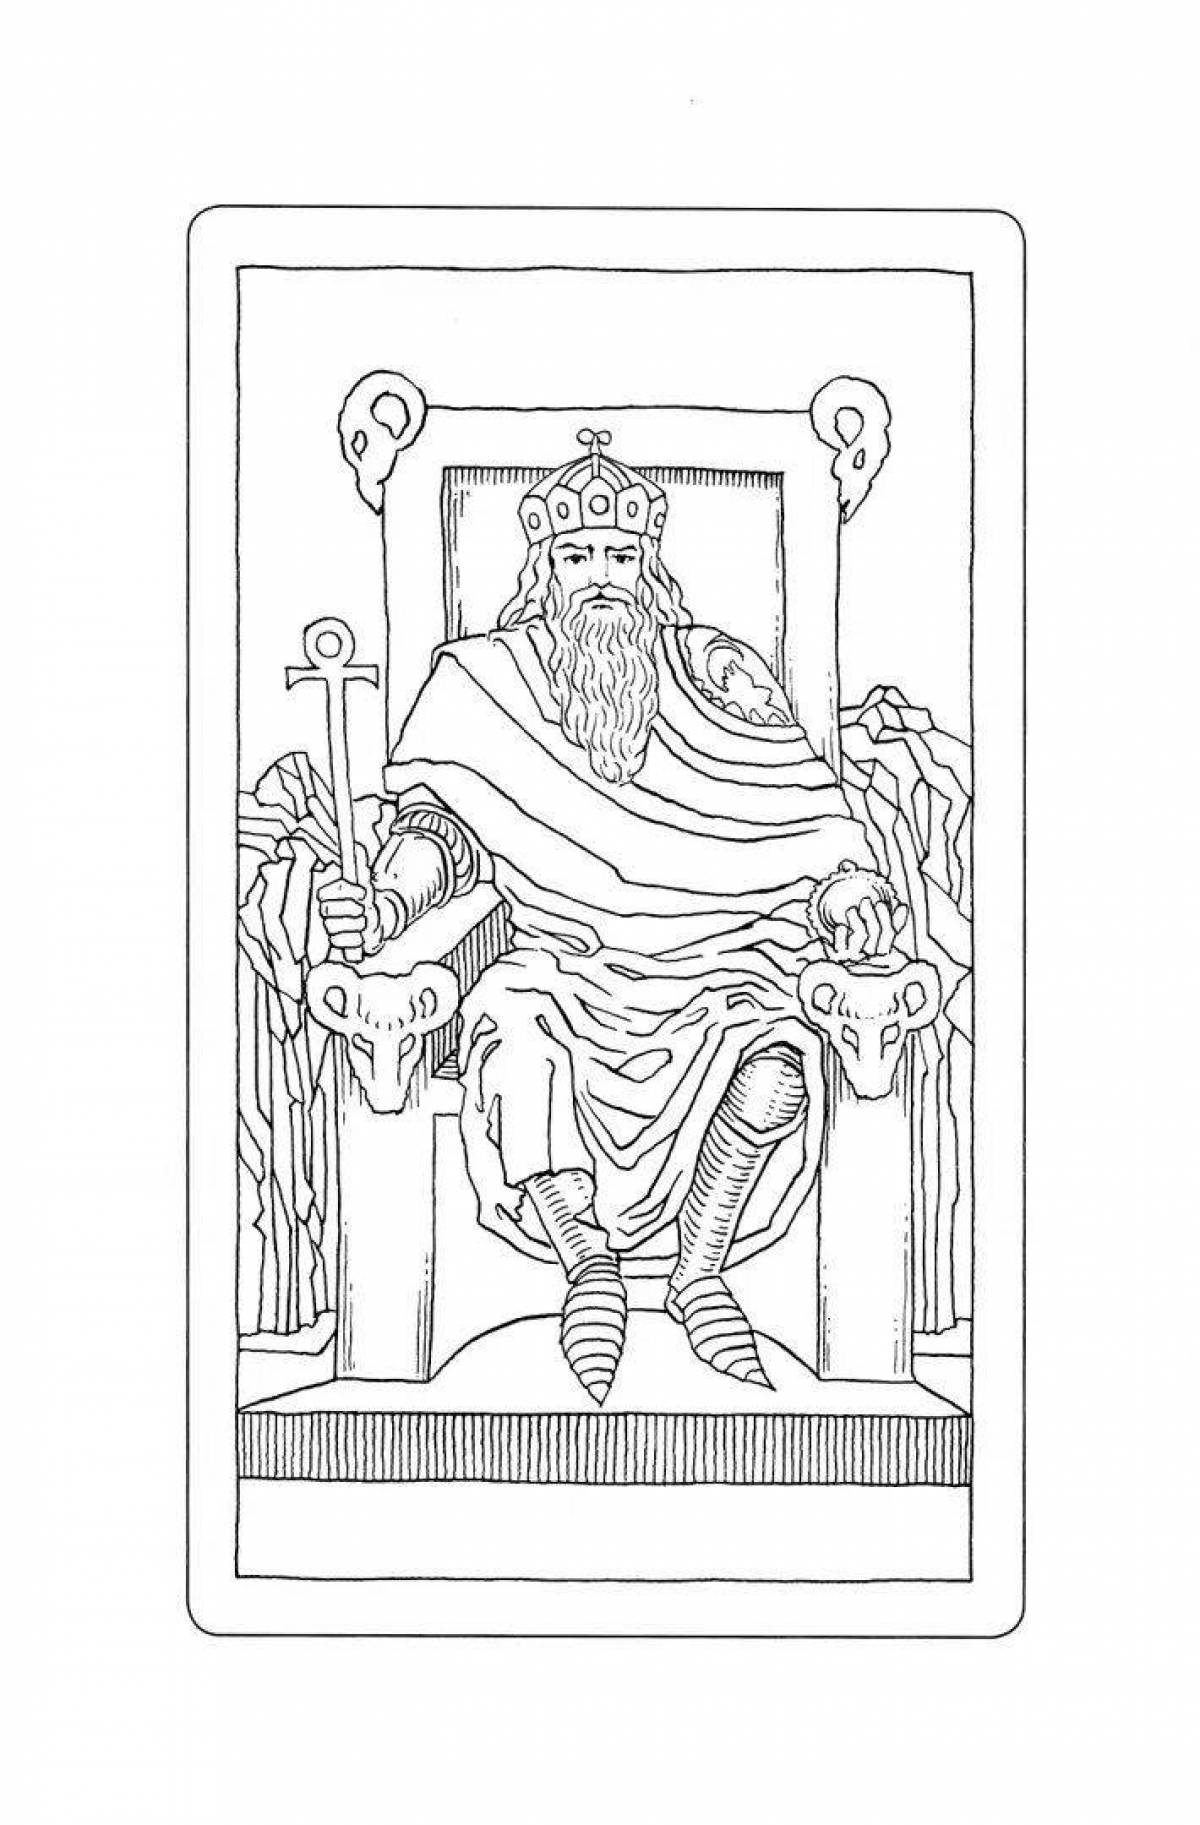 Waite's live tarot coloring page